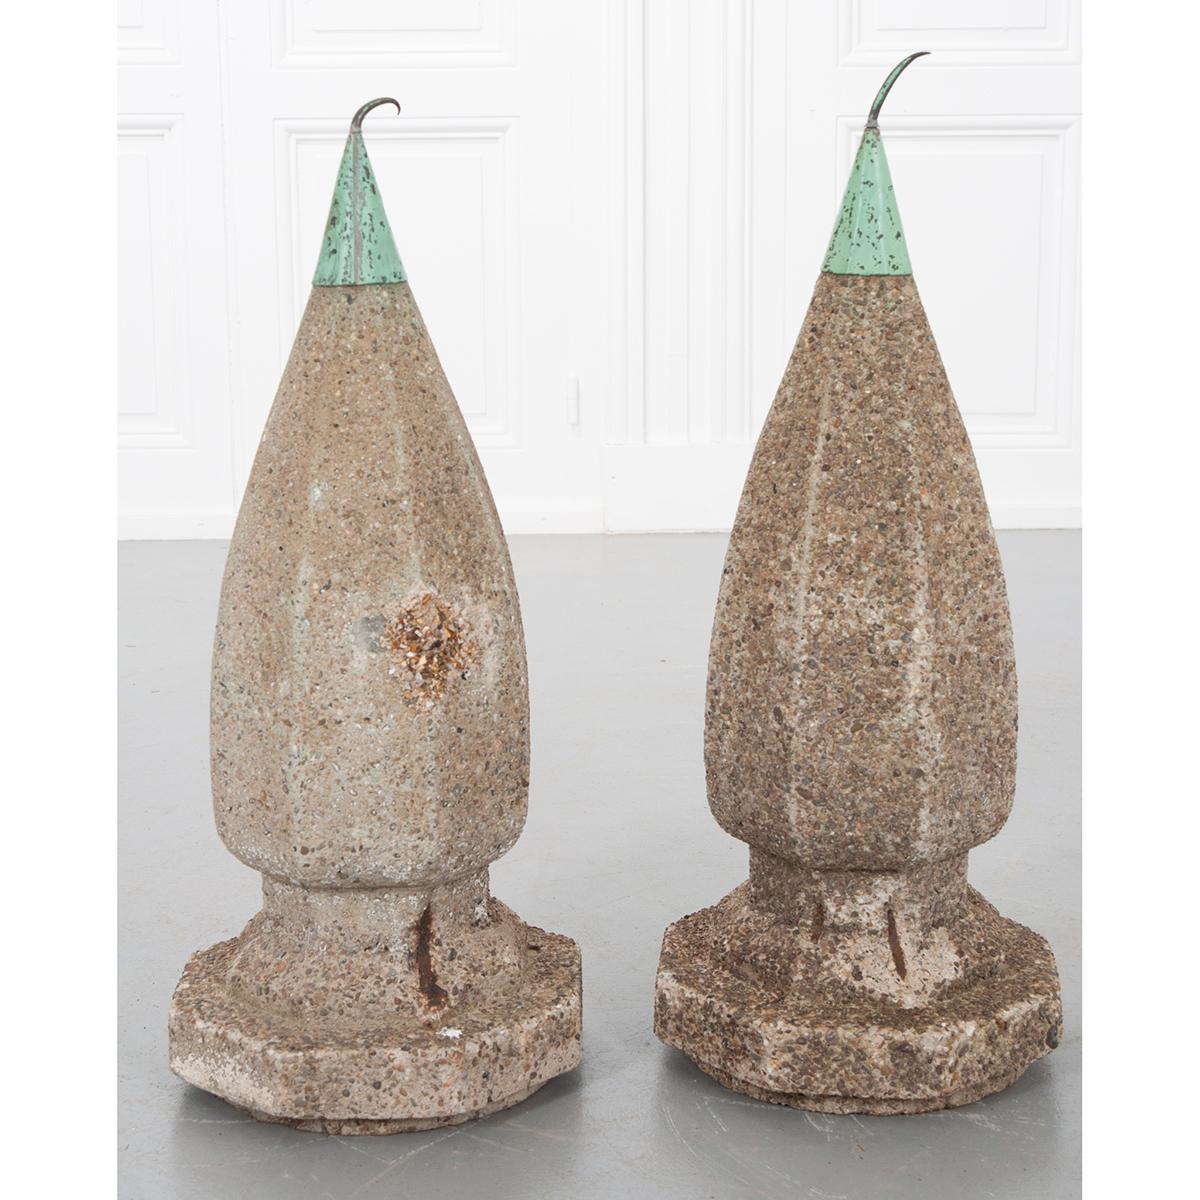 A stunning pair of antique cast stone lightning finials. These beautiful fixtures have an octagonal shape from the base up through the metal tip. They have been aged from decades of exposure to the elements, creating a one-of-a-kind patina. The